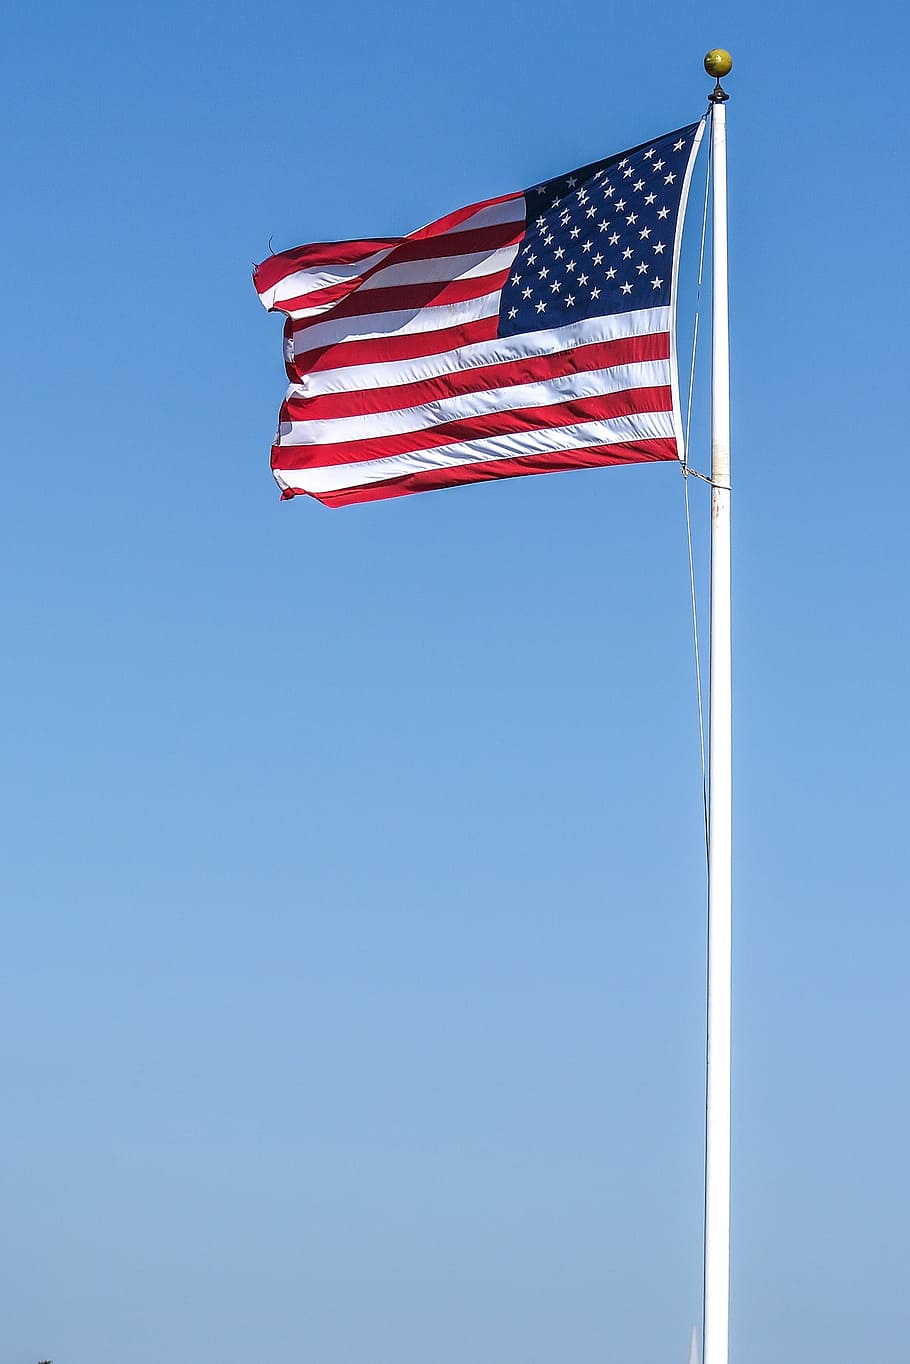 Stars and stripes at full staff, waving in the wind, america